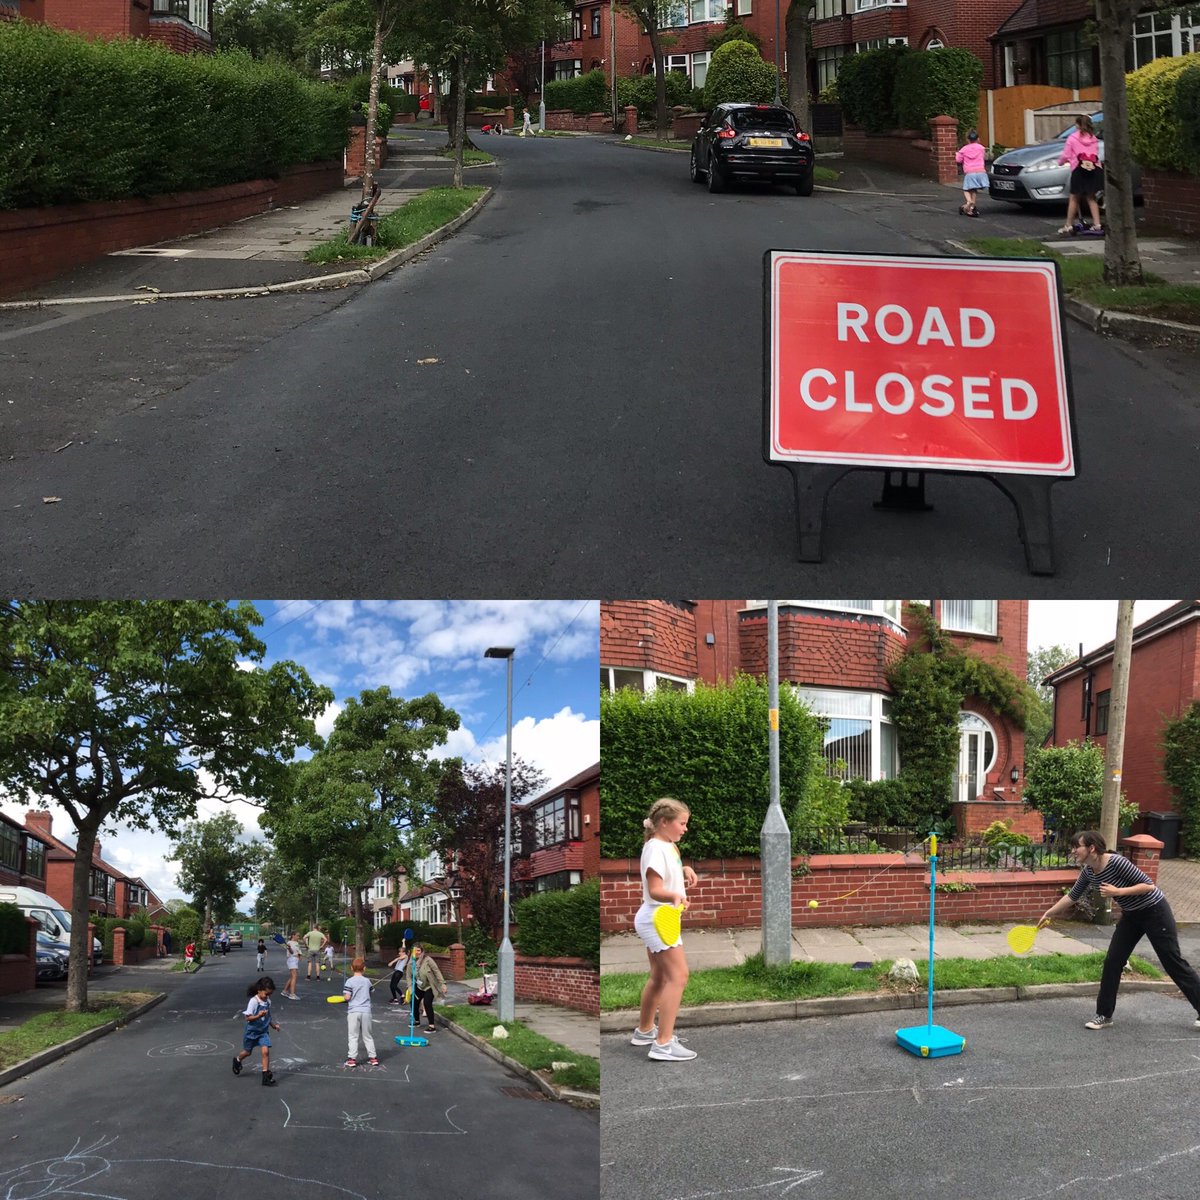 Today we #ReclaimedourStreet with our first #Tameside #QuietStreet No traffic for 3 hours so we could all play and it was so much fun!! Thank you @TamesideCouncil @tmbc_places for making this happen